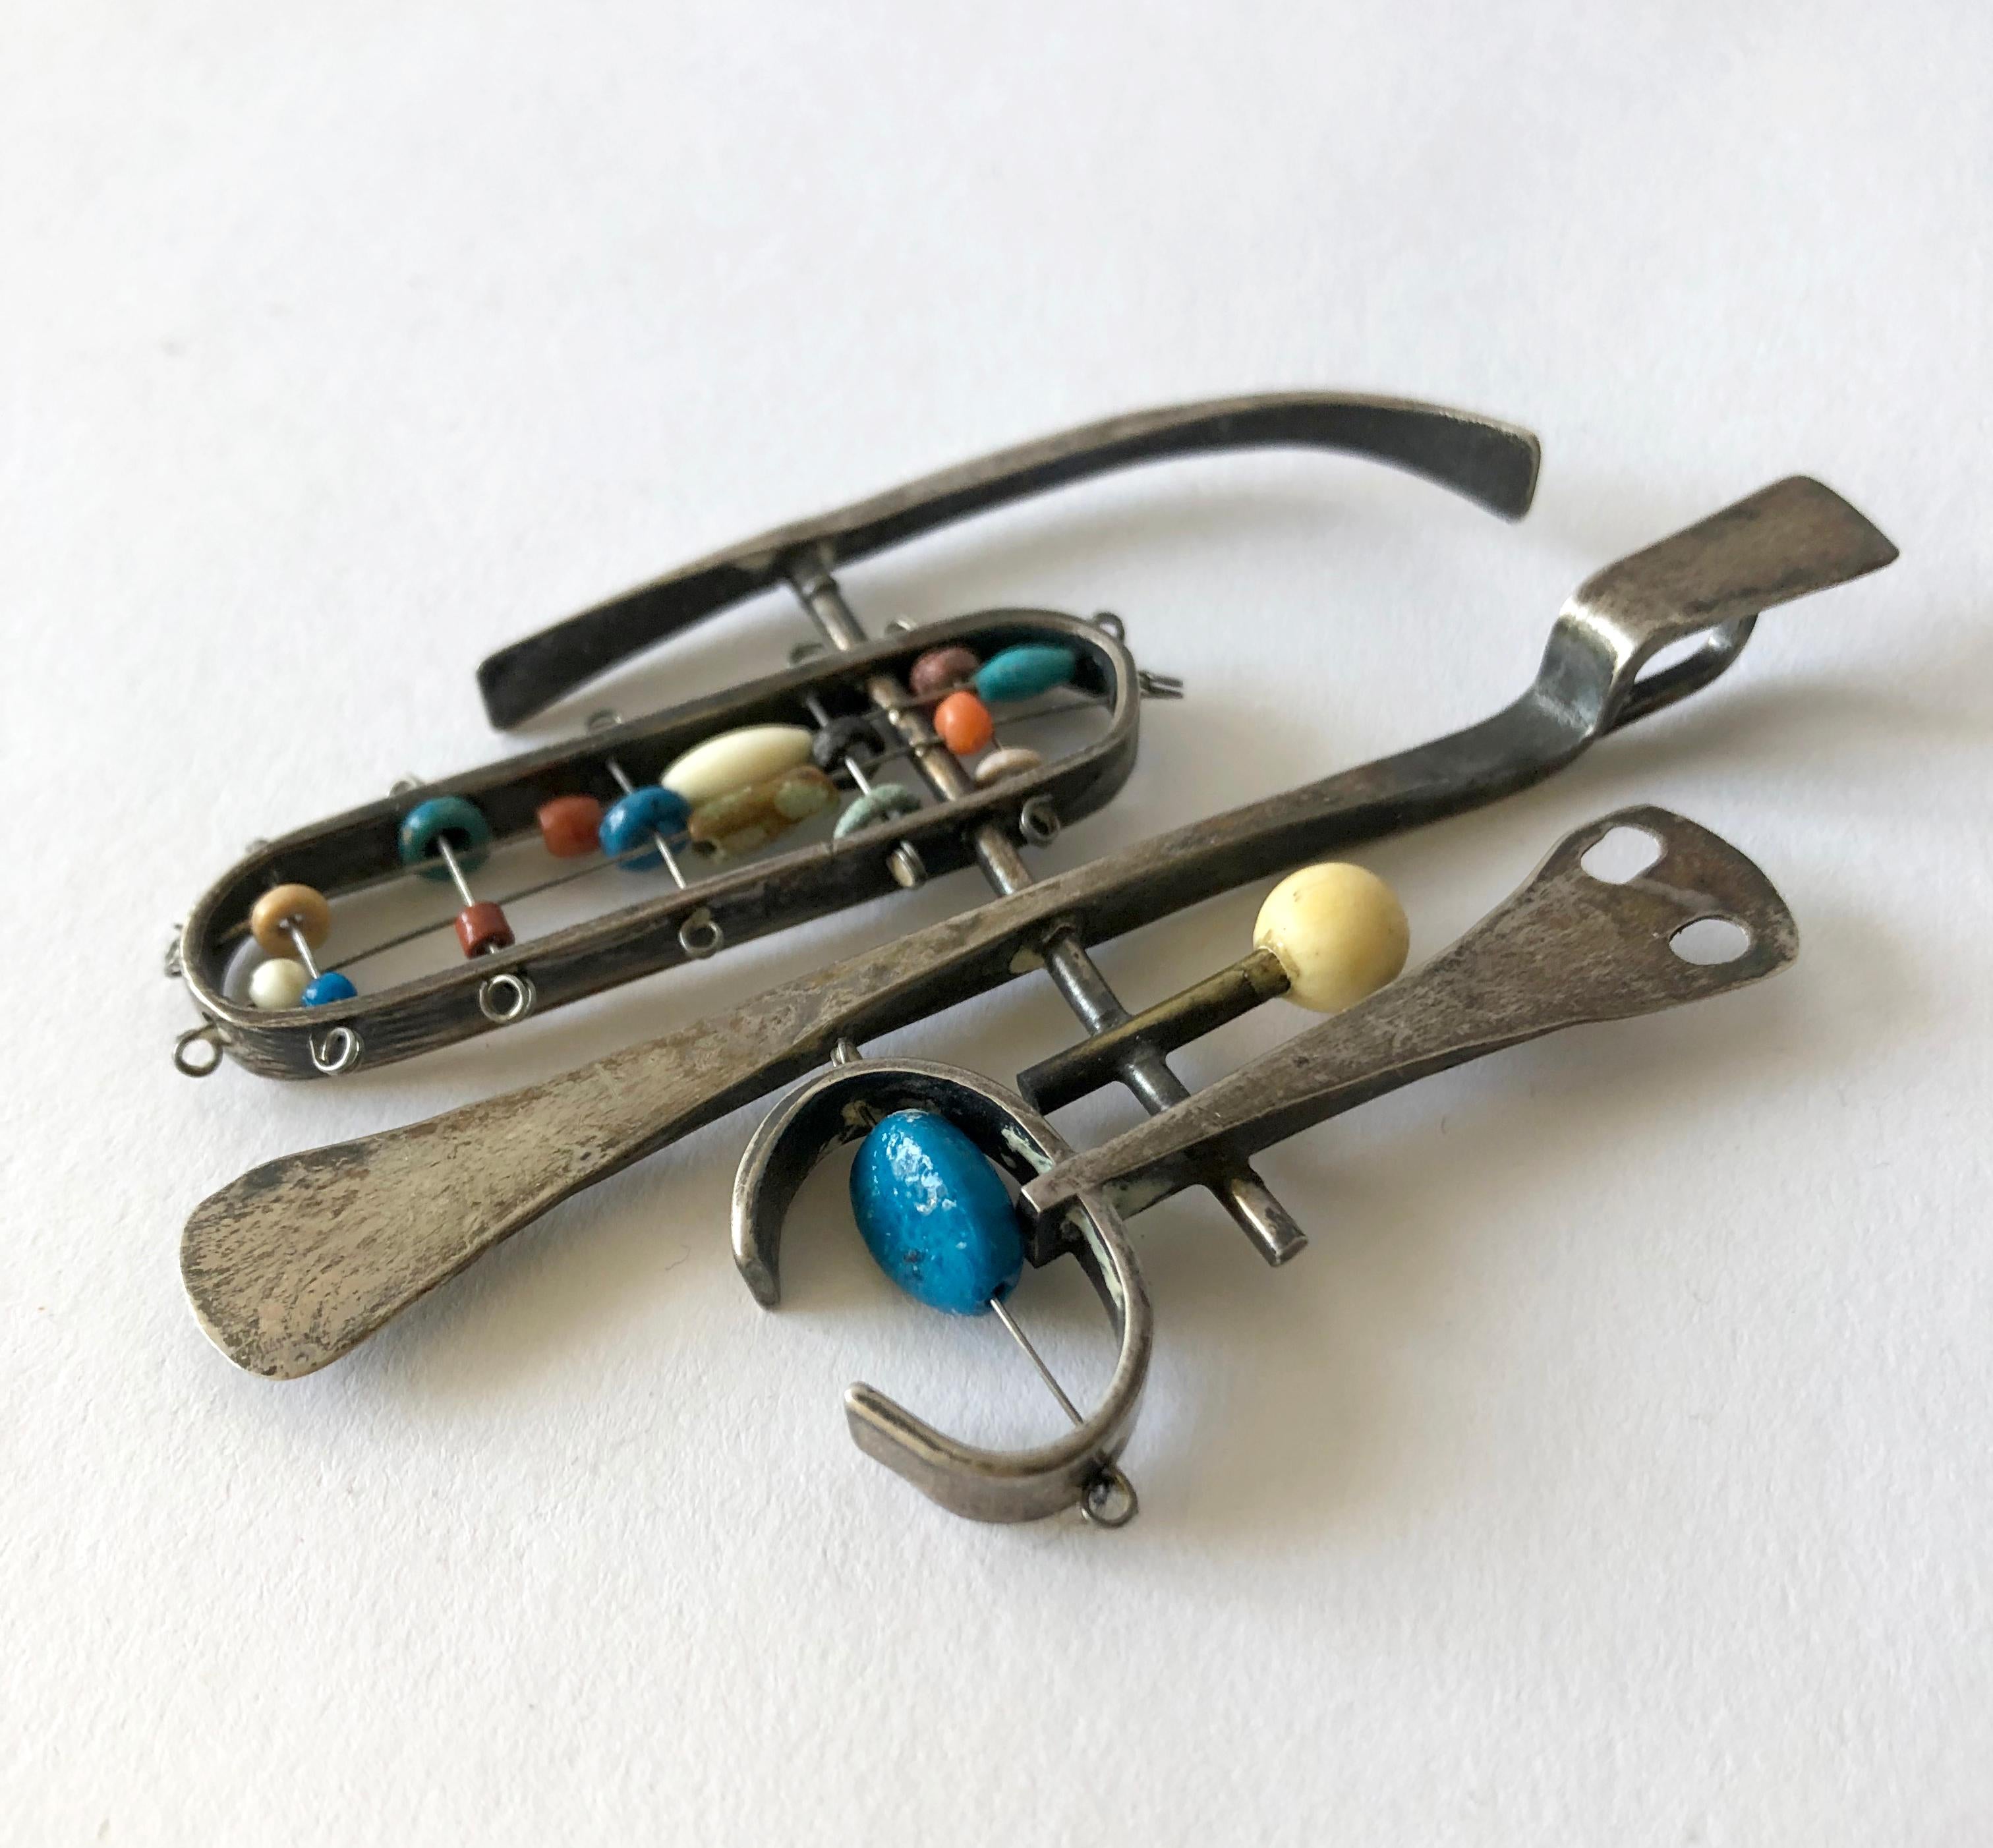 Rare, hand wrought modernist pendant of sterling silver, brass, steel wire and Native American trade beads created by Sammy Gee of San Francisco, California.  Pendant measures  3.5